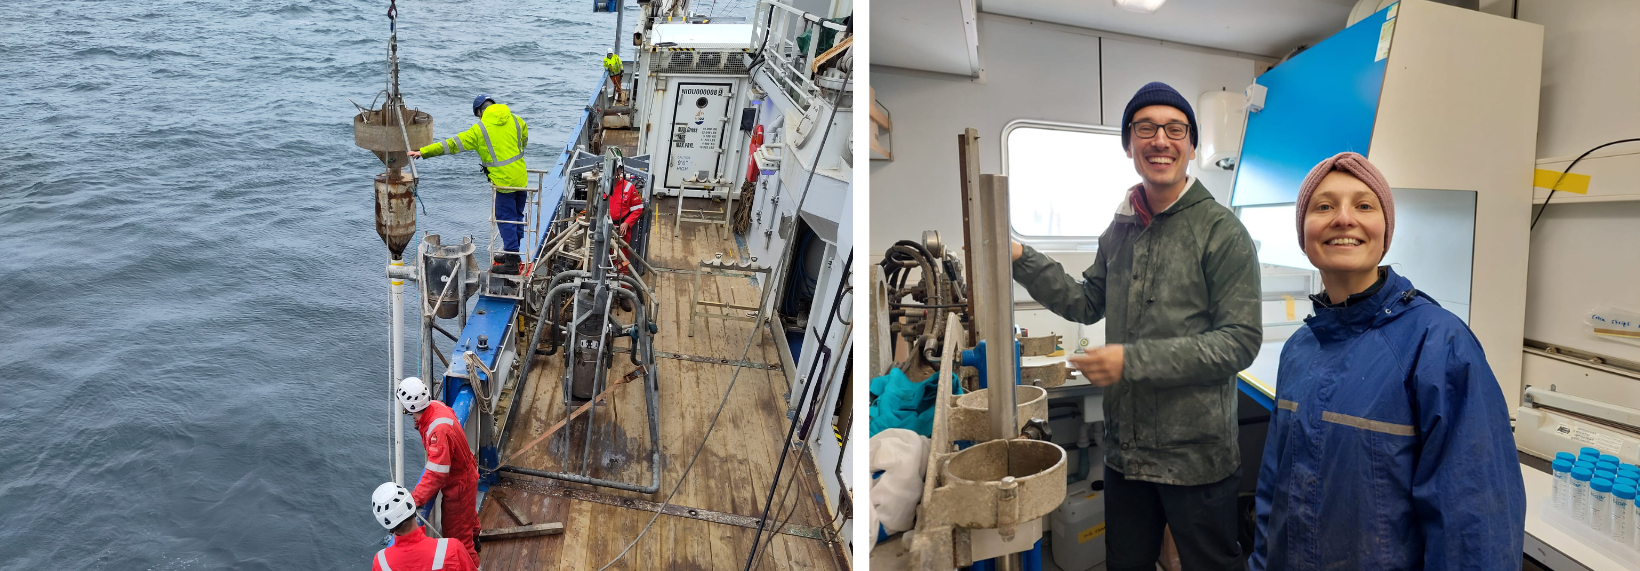 Left: Piston core being prepared by the Pelagia crew to make the journey towards the sea floor and back. Right: Team Paleoceanography.